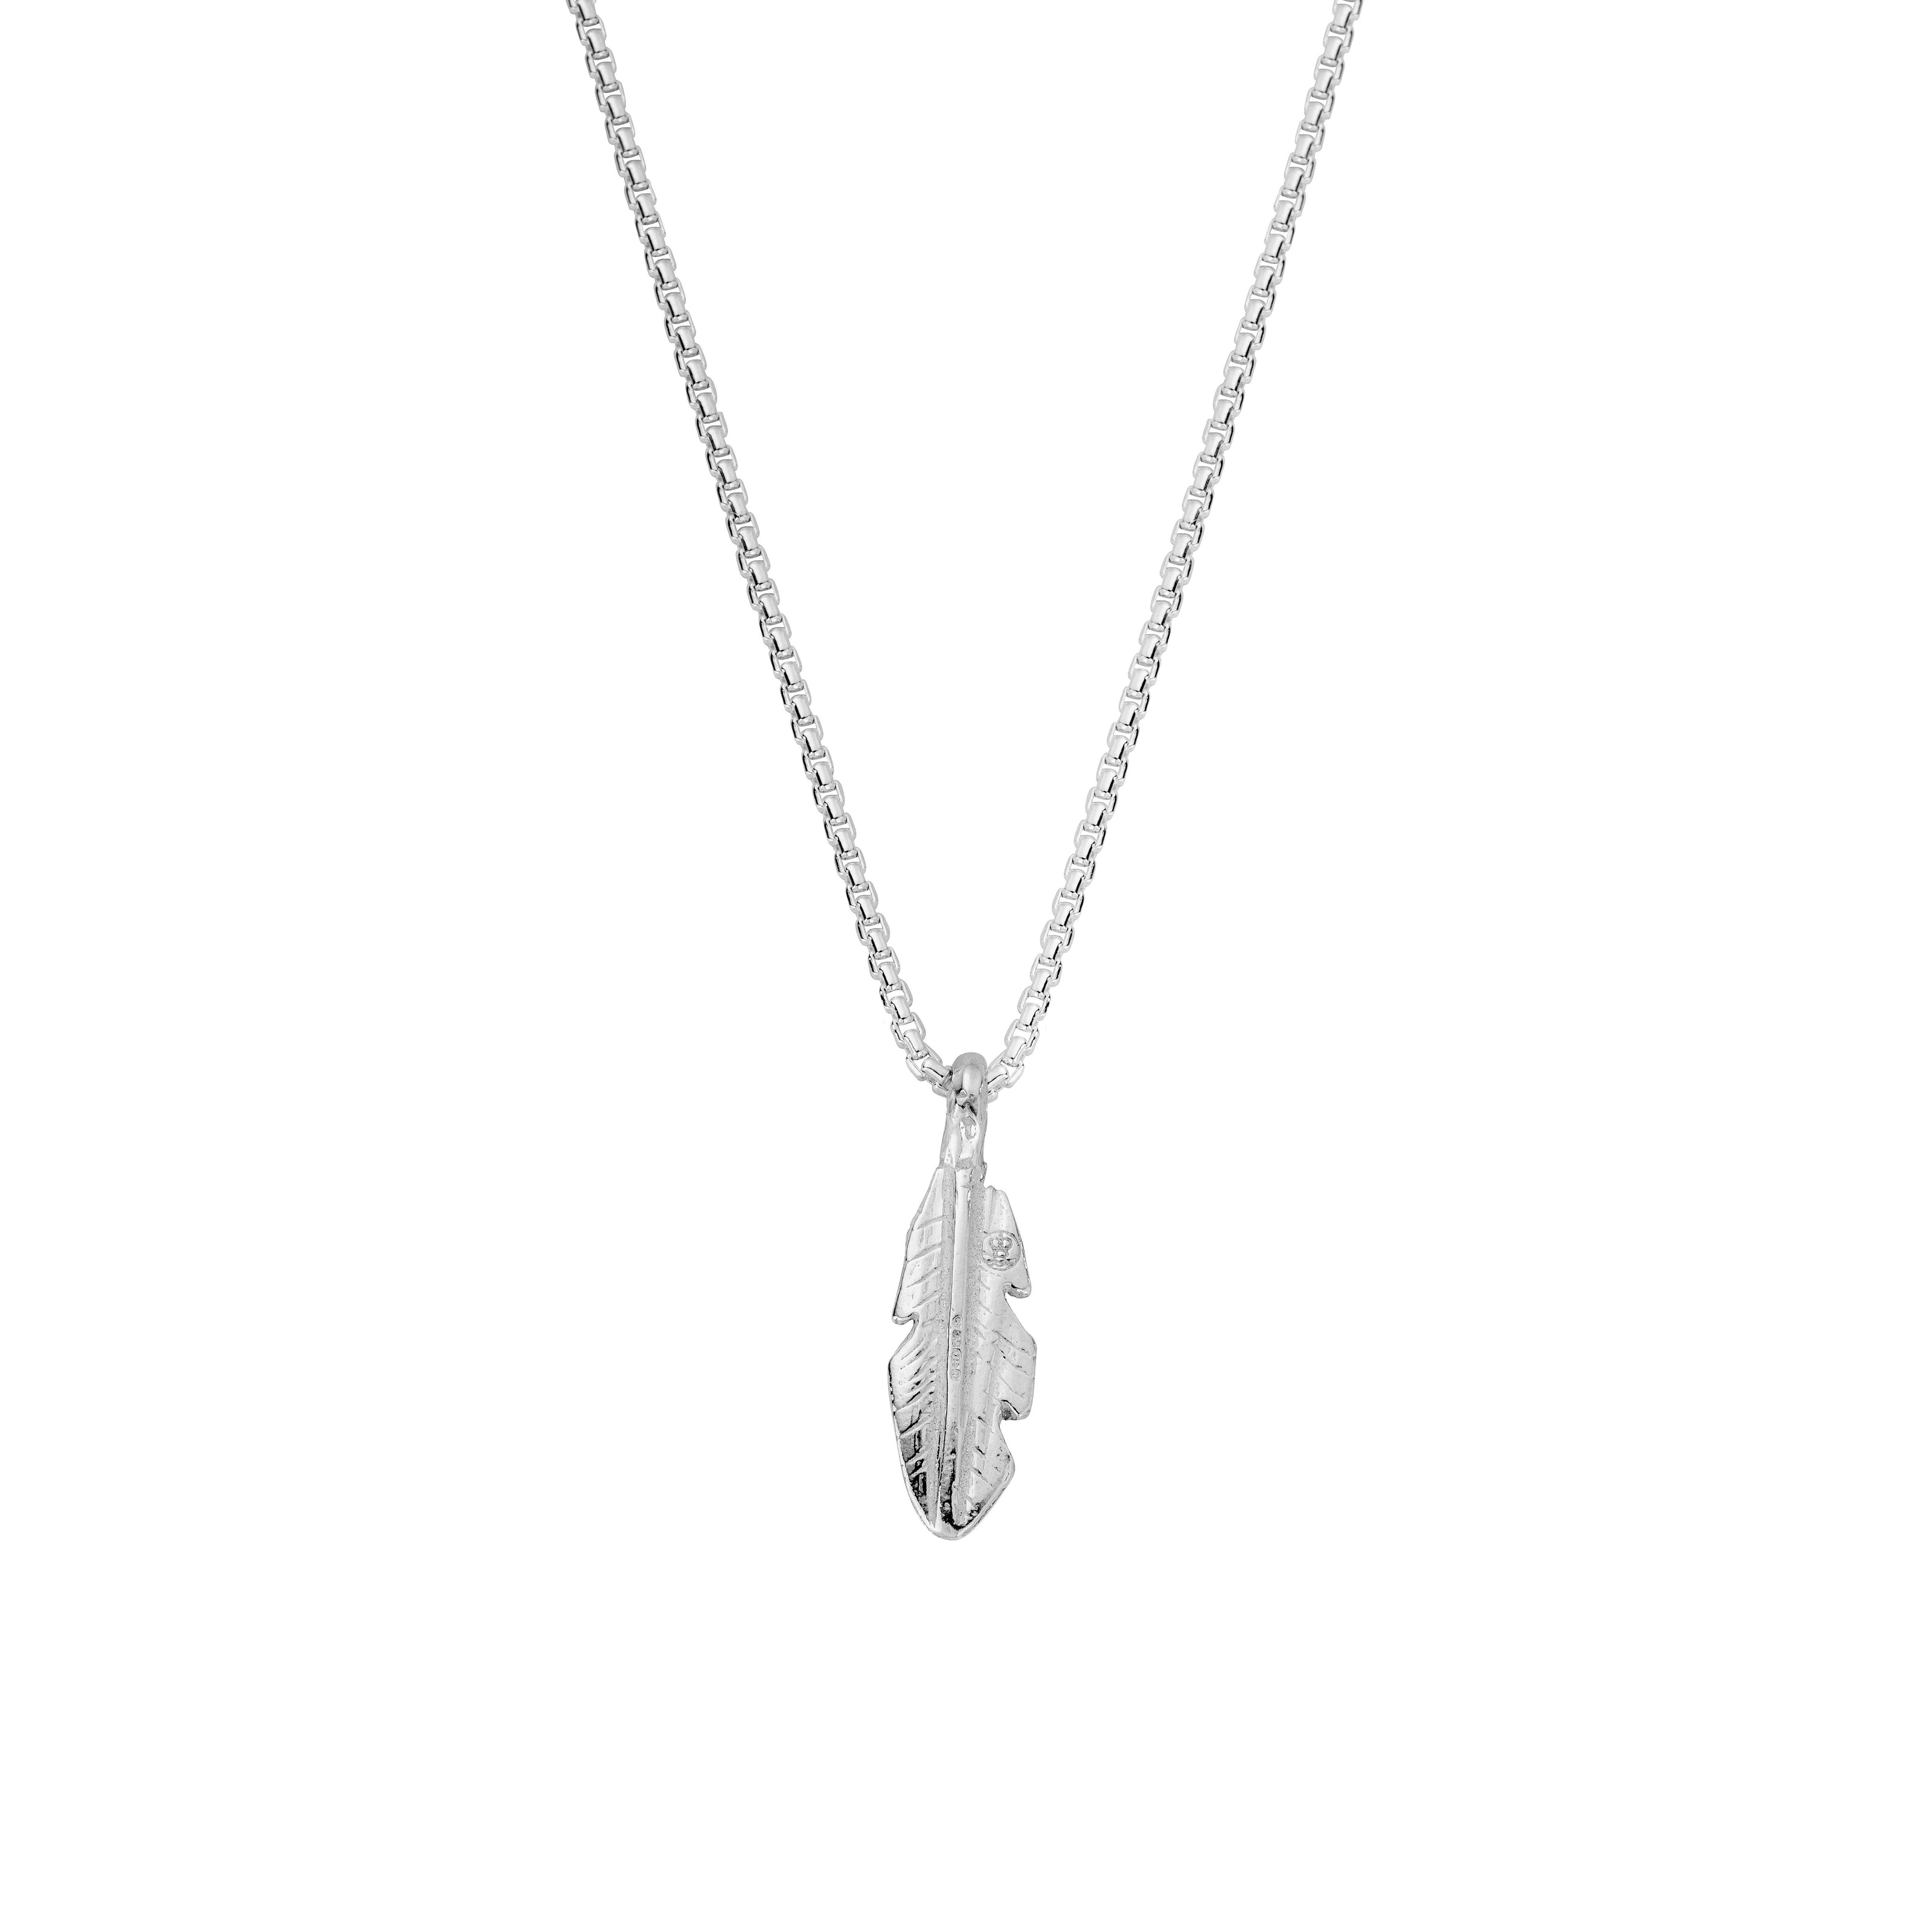 Silver Medium Feather Snake Chain Necklace